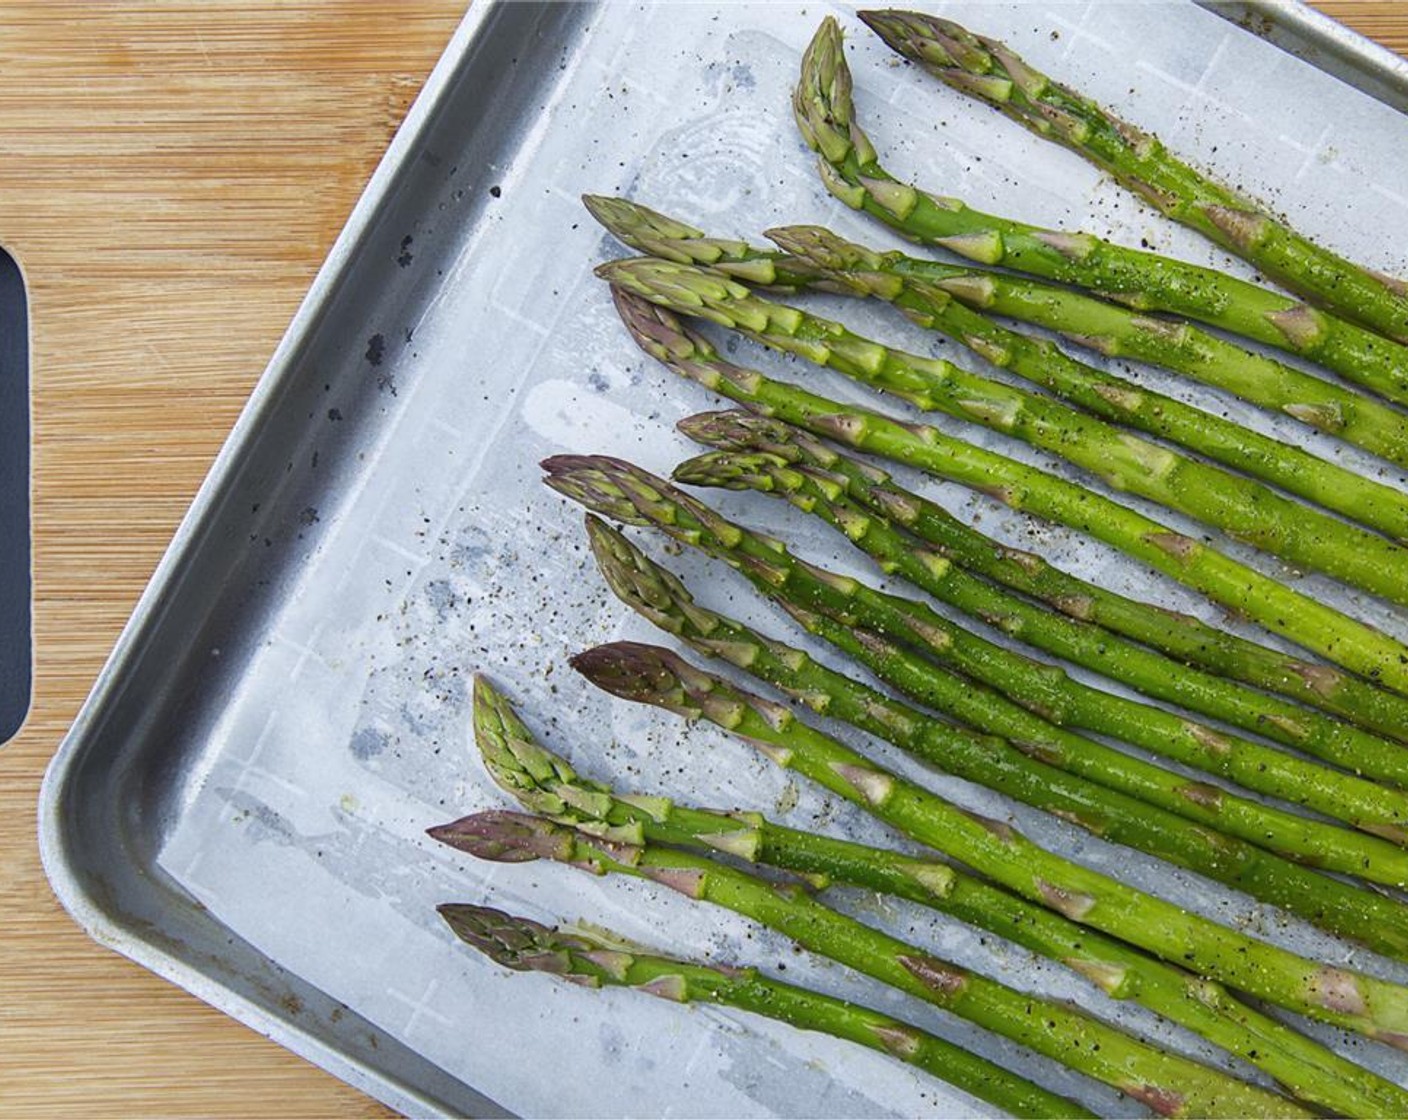 step 1 On a barbecue or in the oven, grill Asparagus (3 cups). Brush the asparagus with Olive Oil (as needed), and season with Salt (to taste) and Ground Black Pepper (to taste).